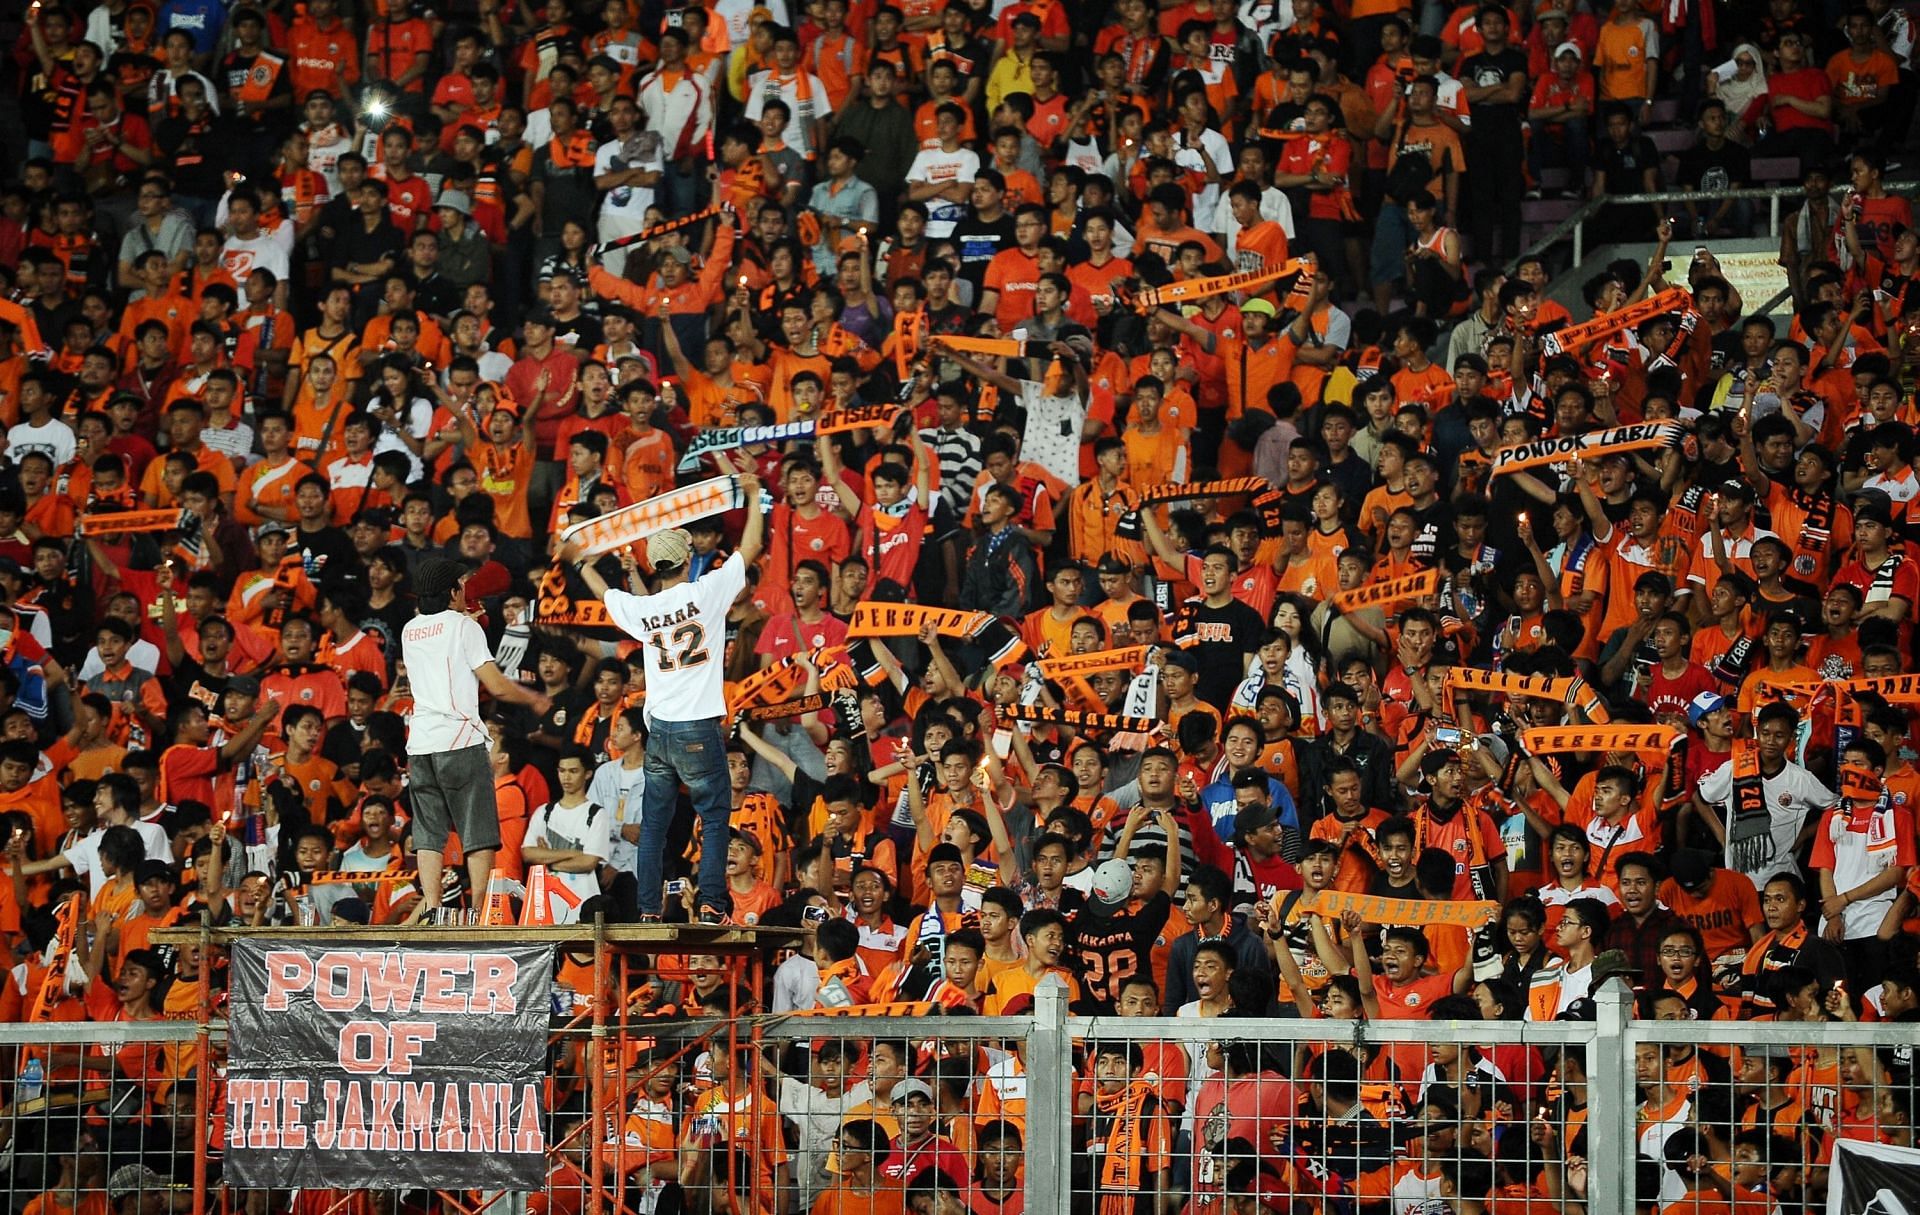 Football in Indonesia is picking up pace